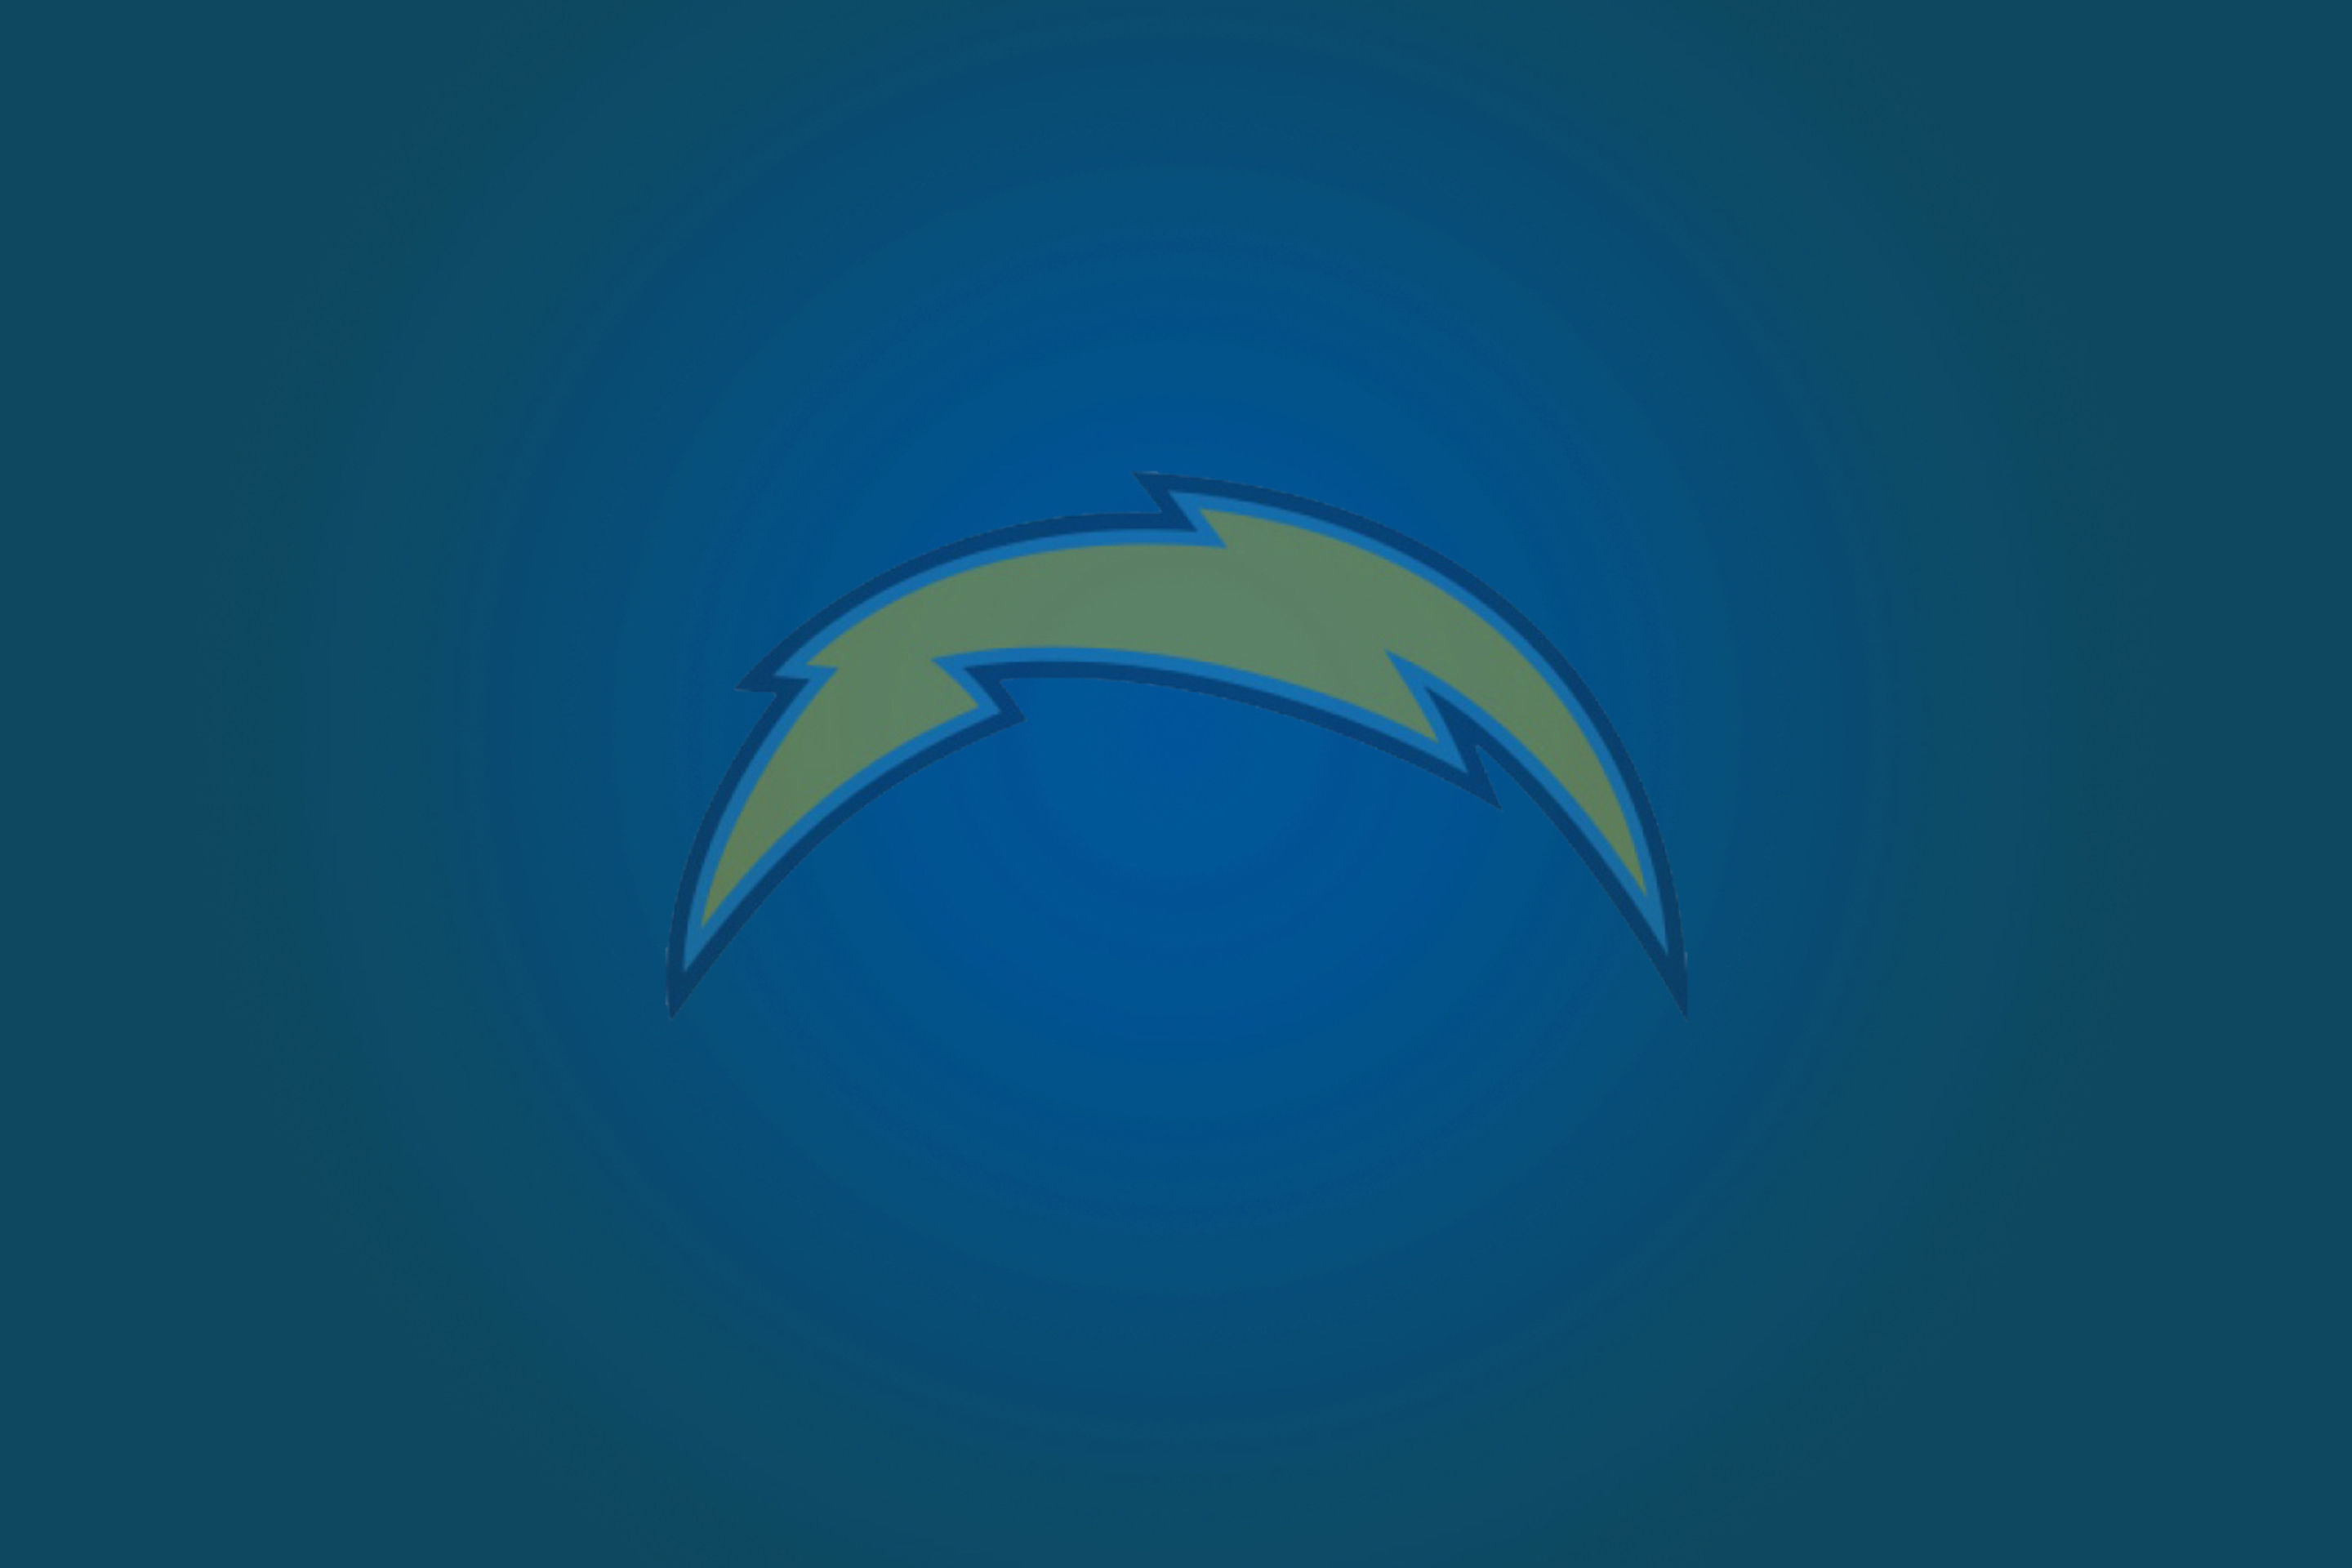 San Diego Chargers wallpaper 2880x1920